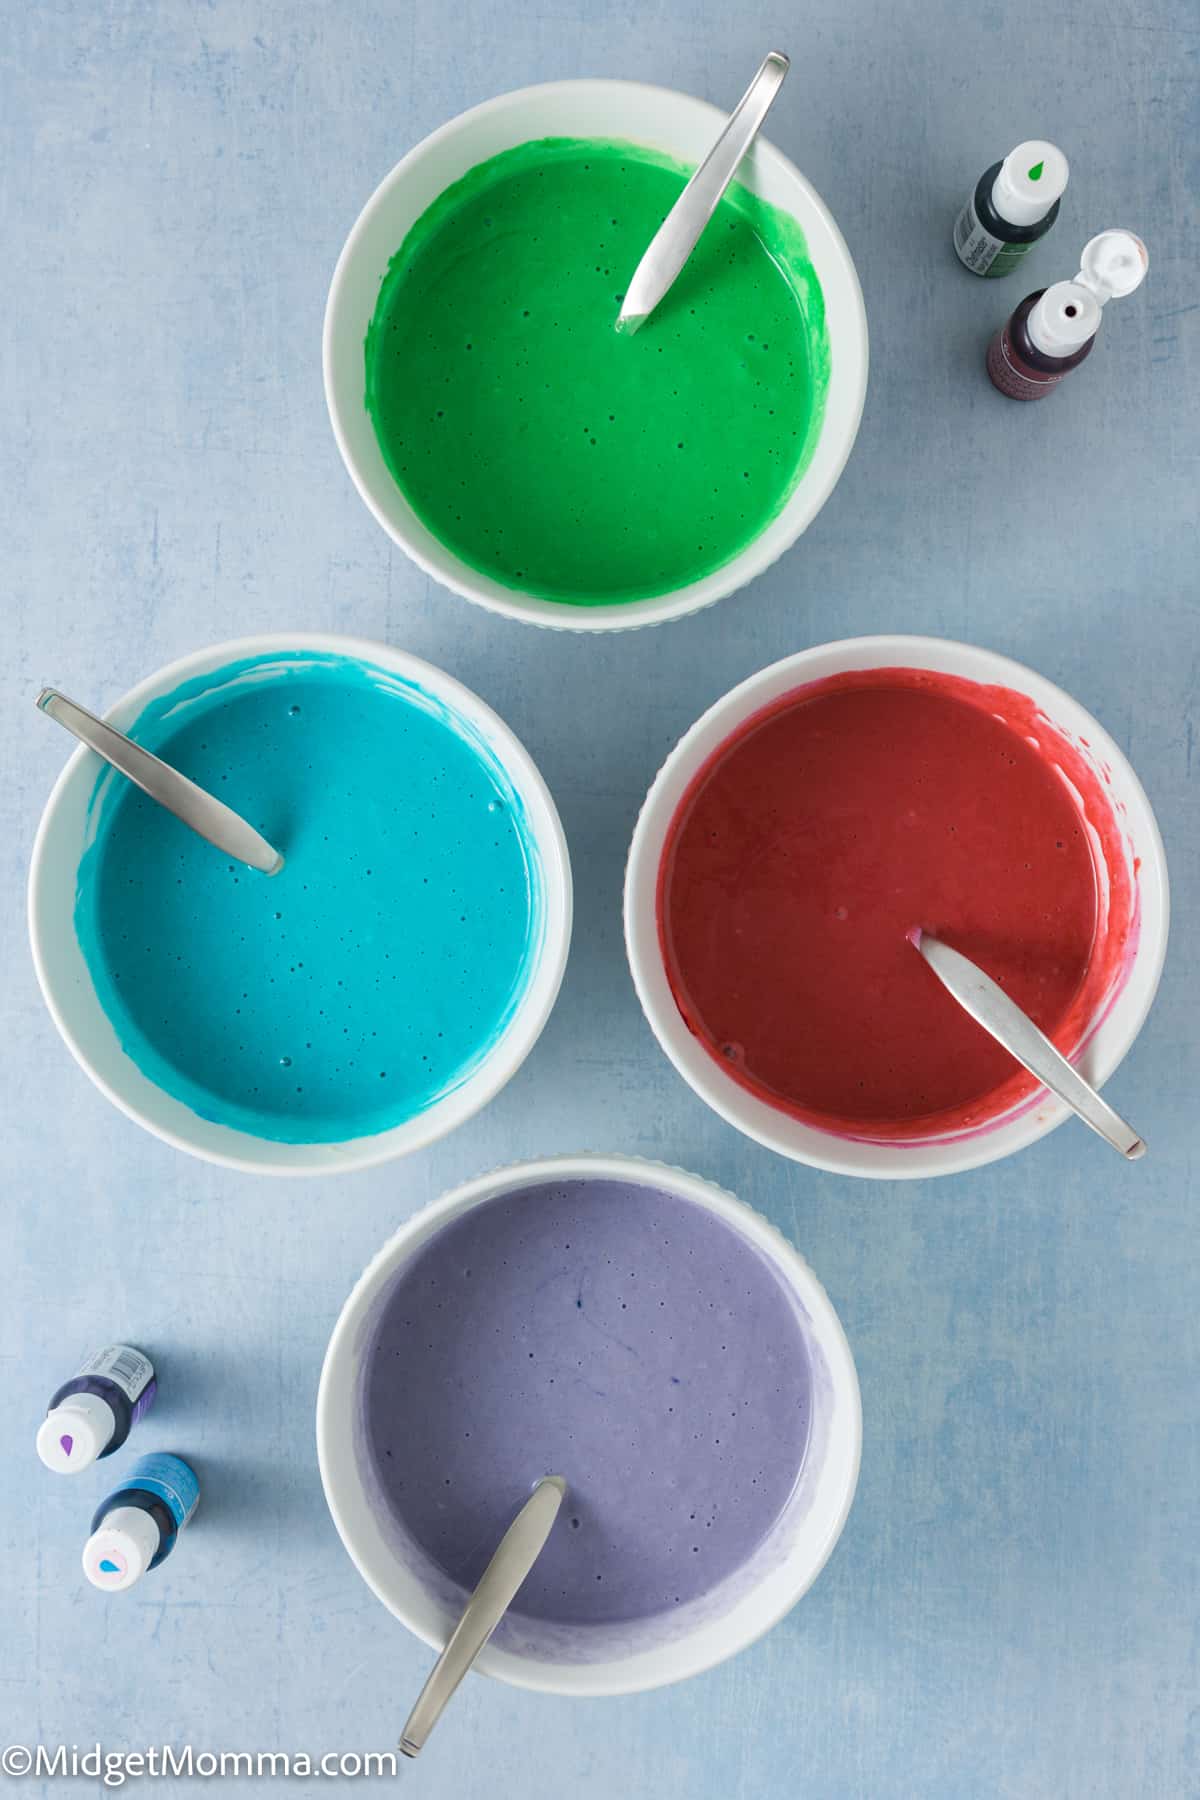 Four bowls with different colors of pancake batter in them.